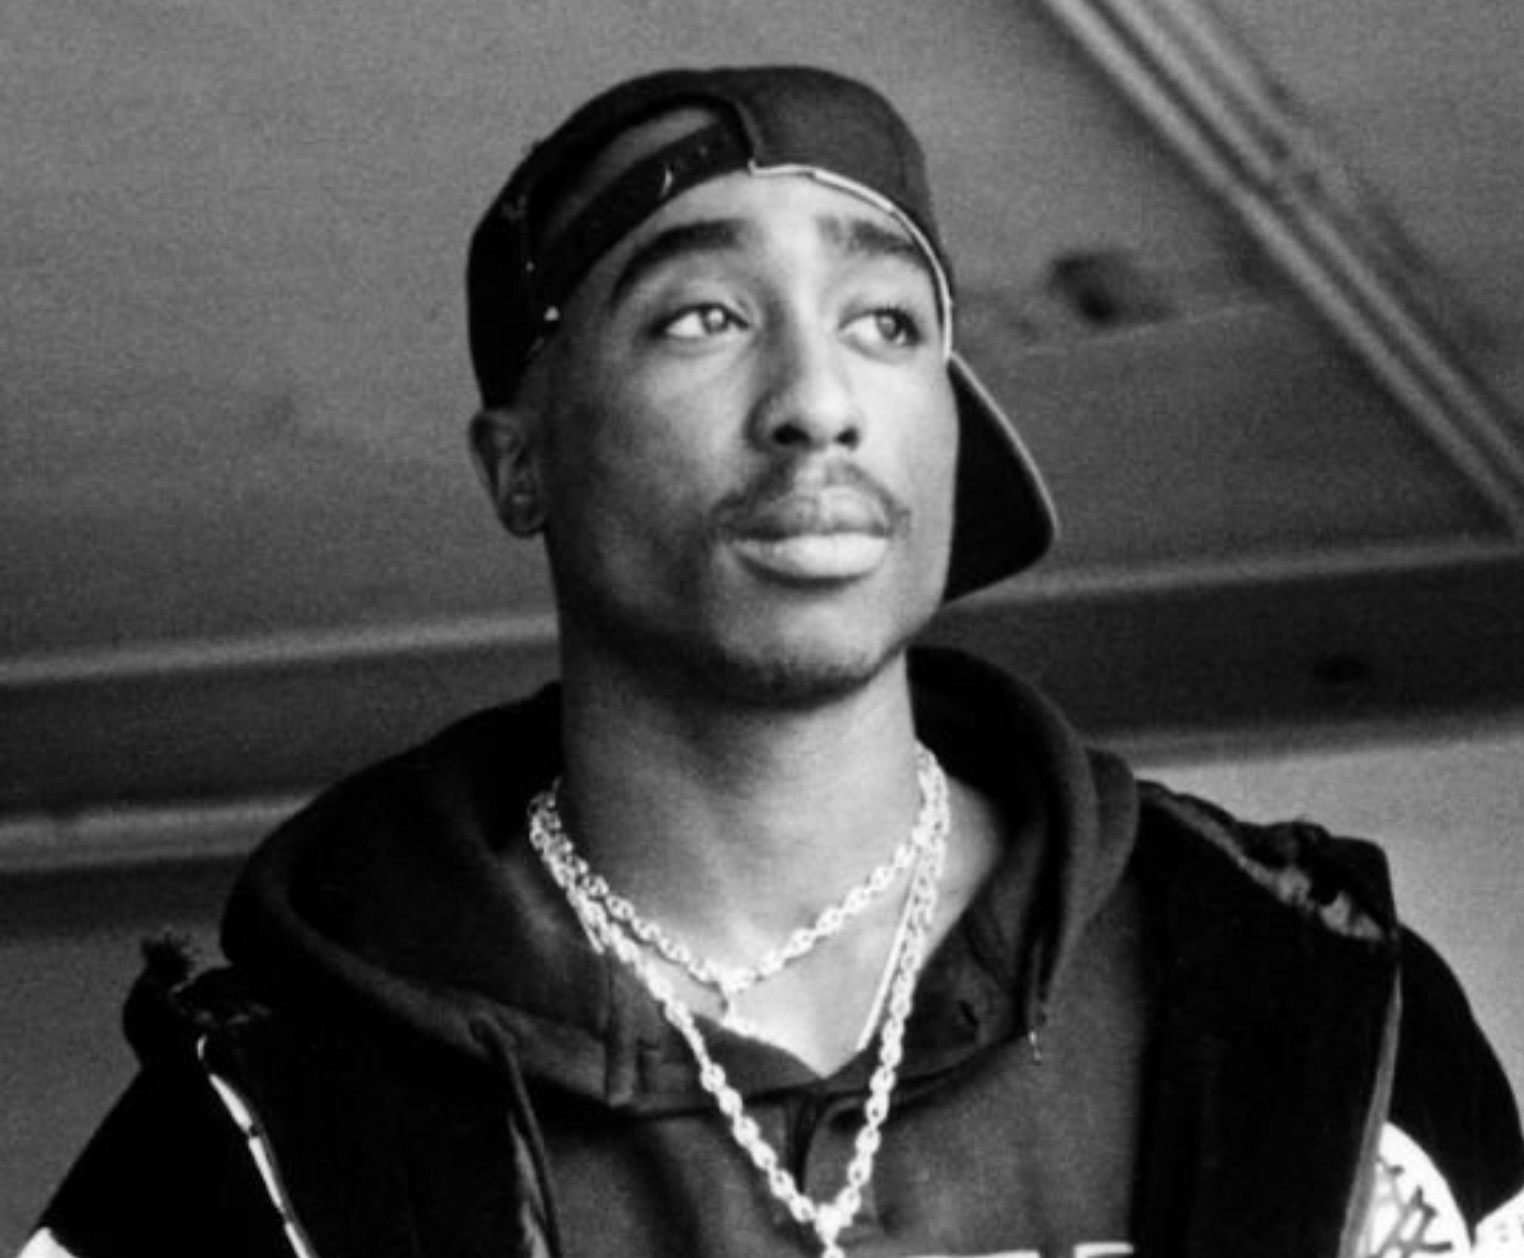 Tupac Shakur’s “So Many Tears” Spoke To The Suffering Of A Revolutionary